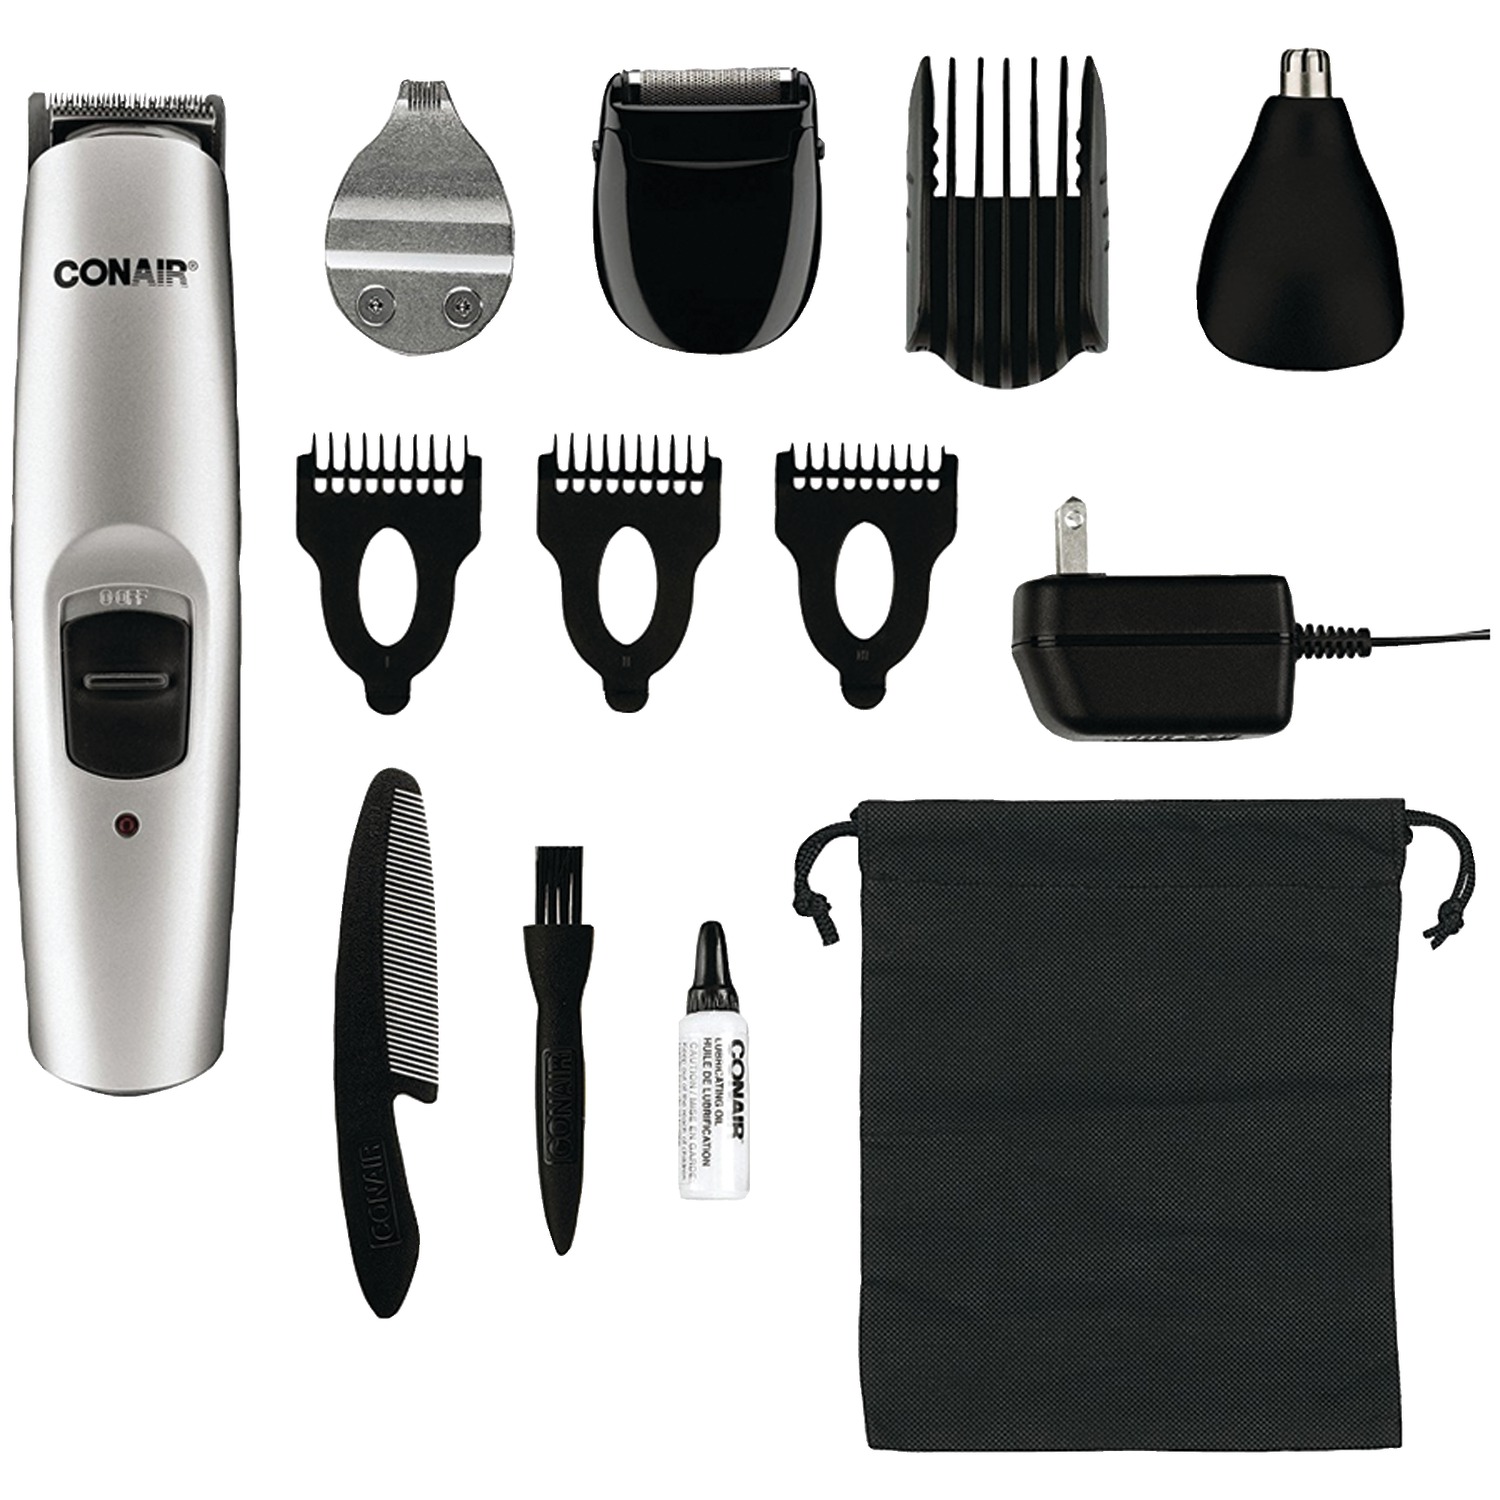 Conair Gmt189gb 13-piece All-in-1 Grooming System